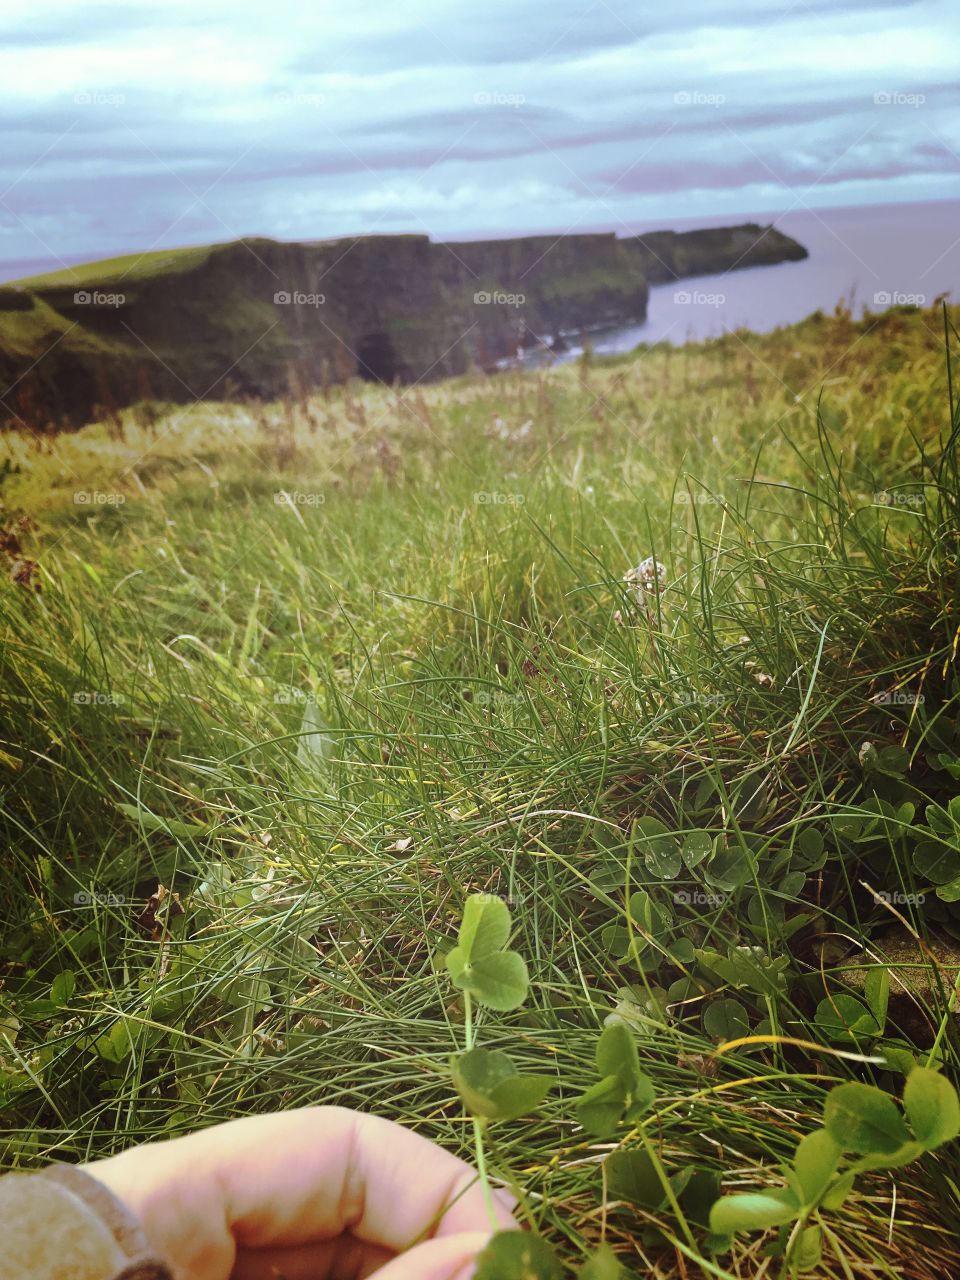 Some clovers in the grass at the Cliffs of Moher in Ireland 